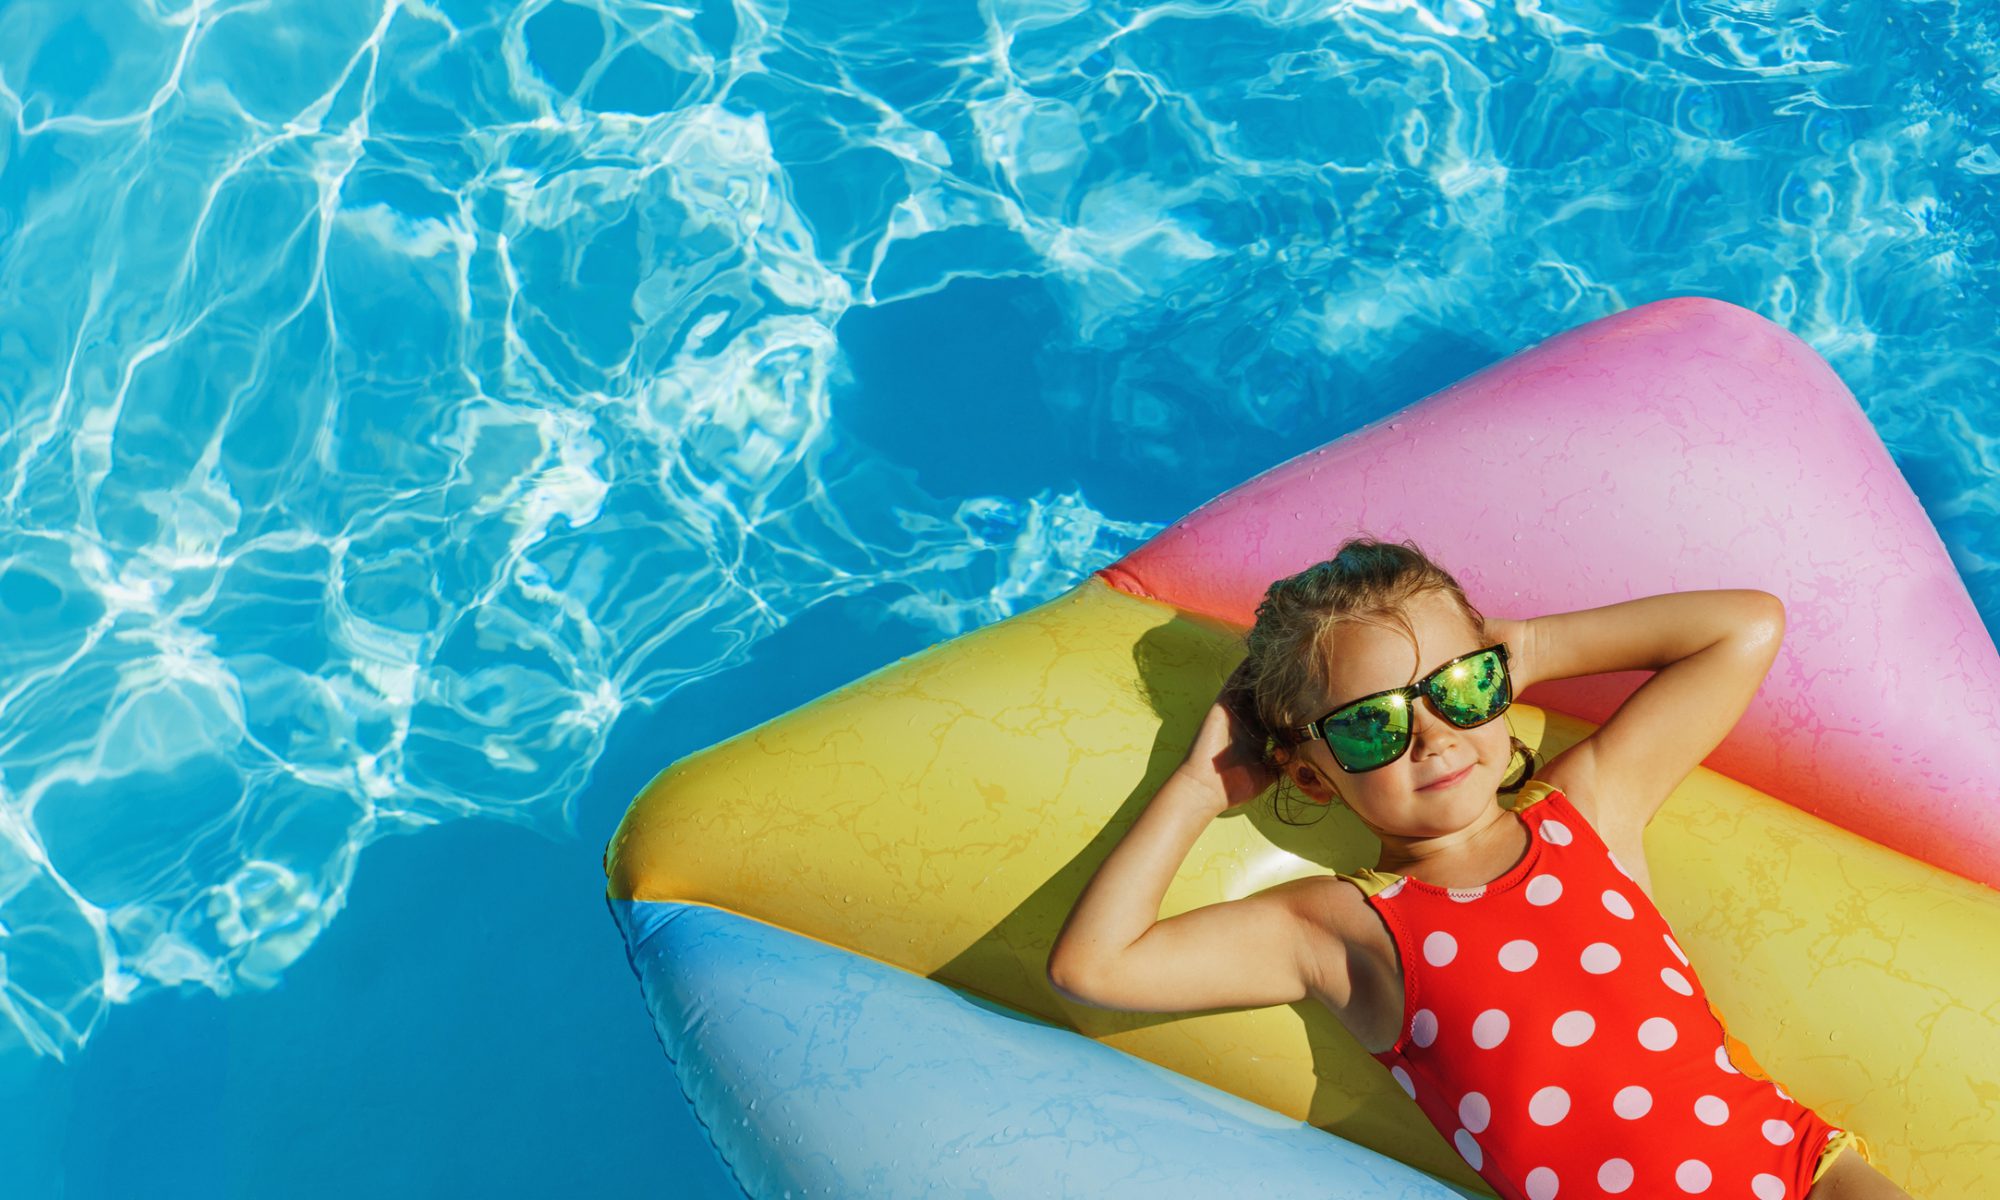 Child in swimming pool. Having fun on vacation at the hotel pool. Colorful vacation concept.